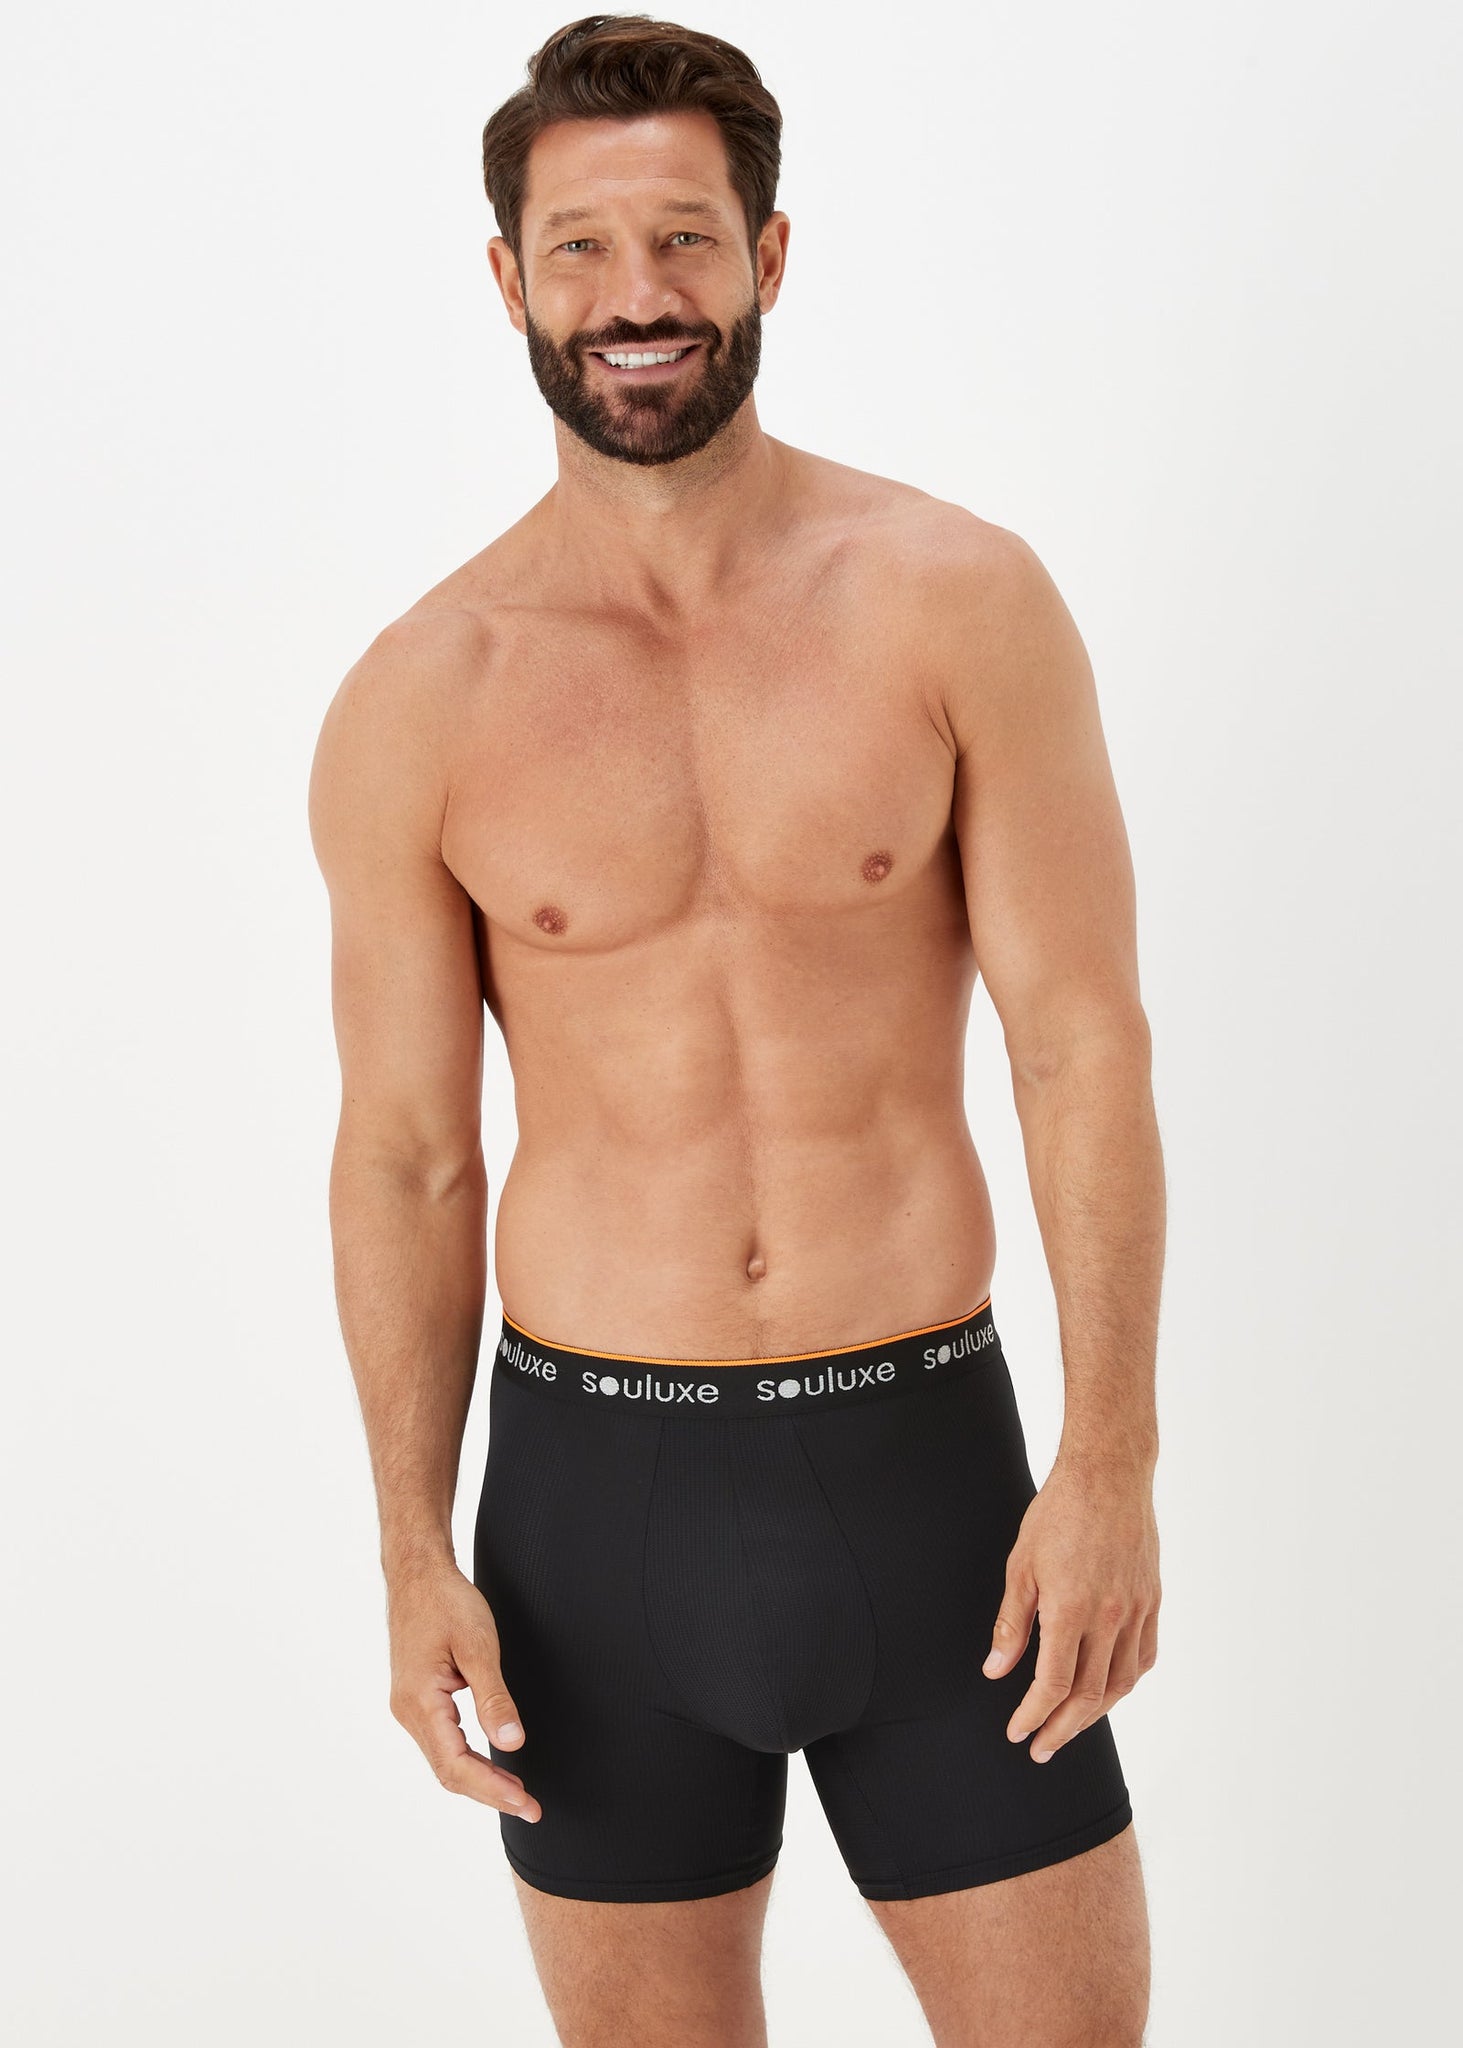 Souluxe 3 Pack Black Sports Boxers  M212363